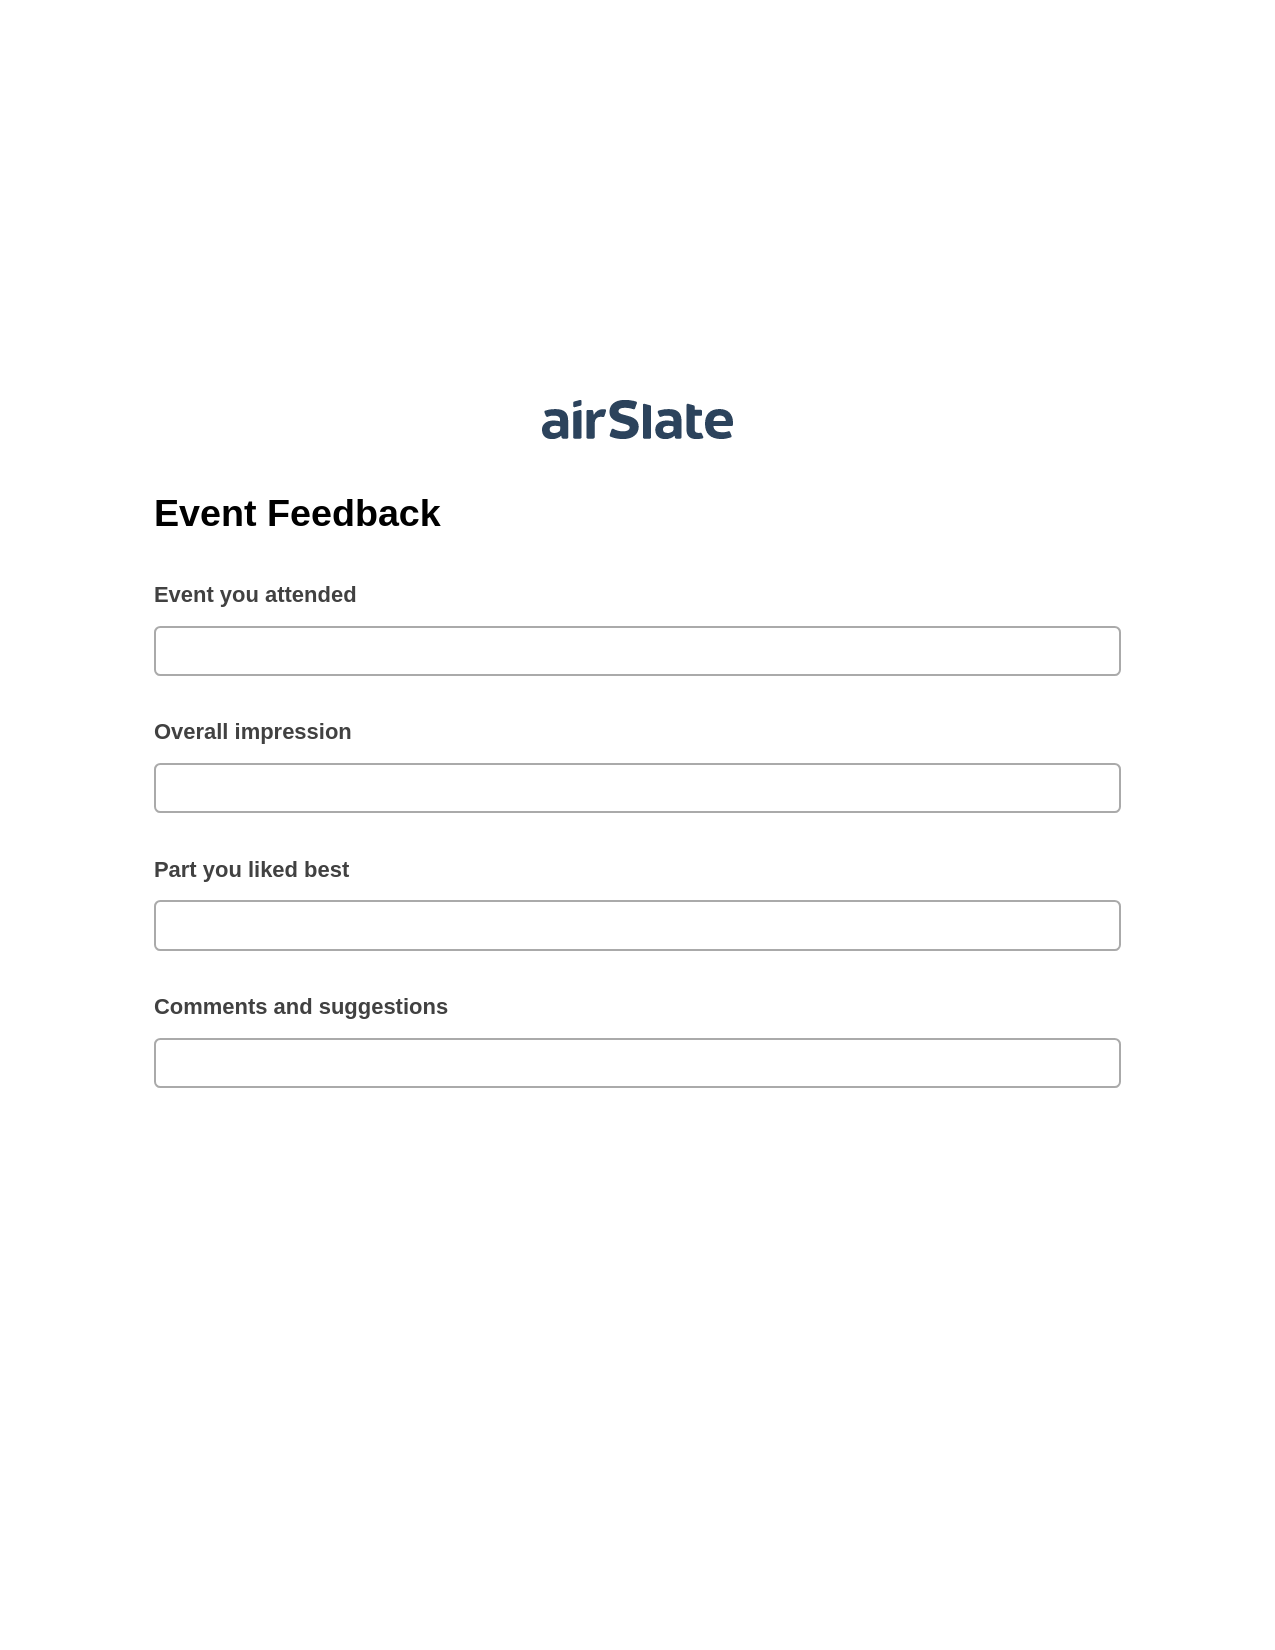 Multirole Event Feedback Pre-fill from Salesforce Records with SOQL Bot, Create slate addon, Export to Smartsheet